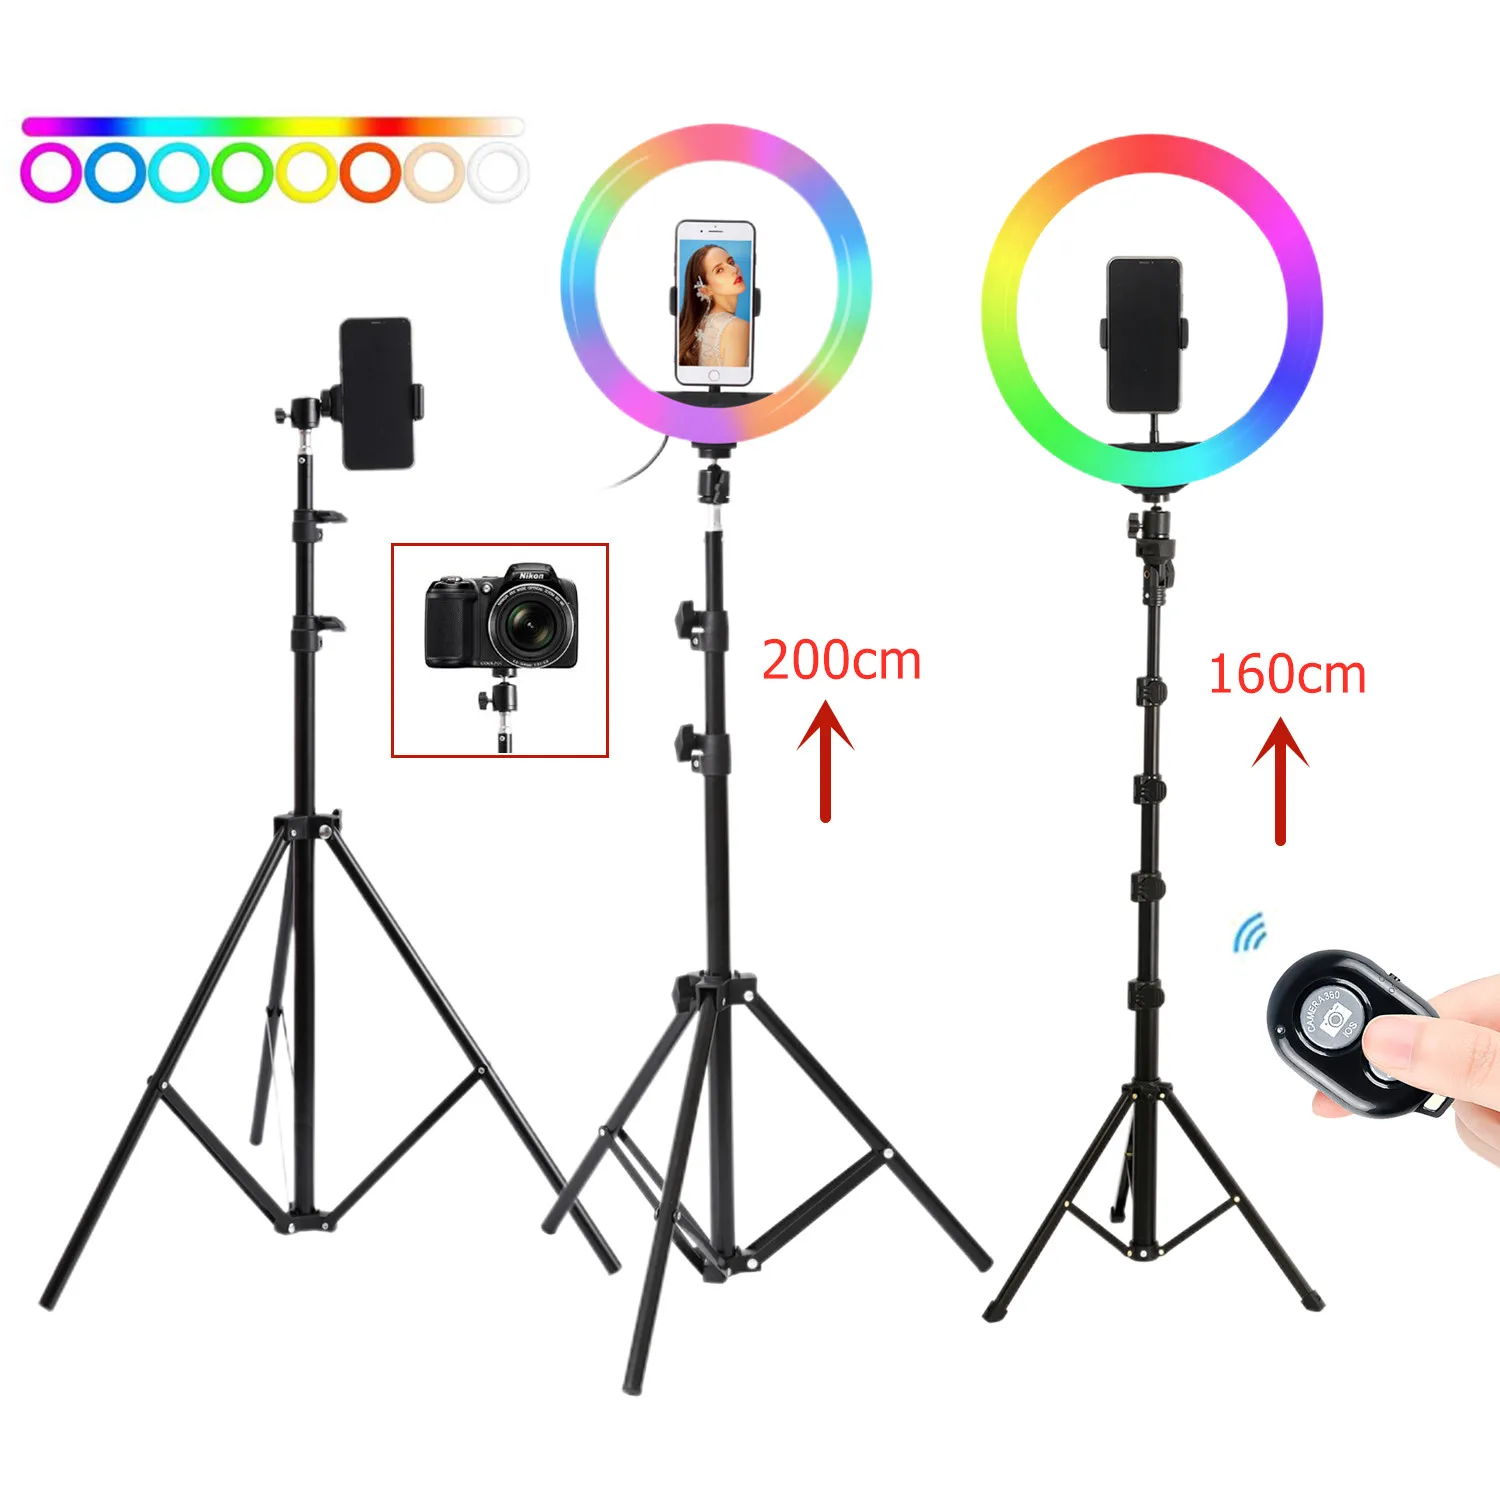 10inch 13inch Selfie RGB LED Round Ring Lamp with Stand Tripod Photographic lighting for Phone TikTok Youtube Makeup Video Vlog